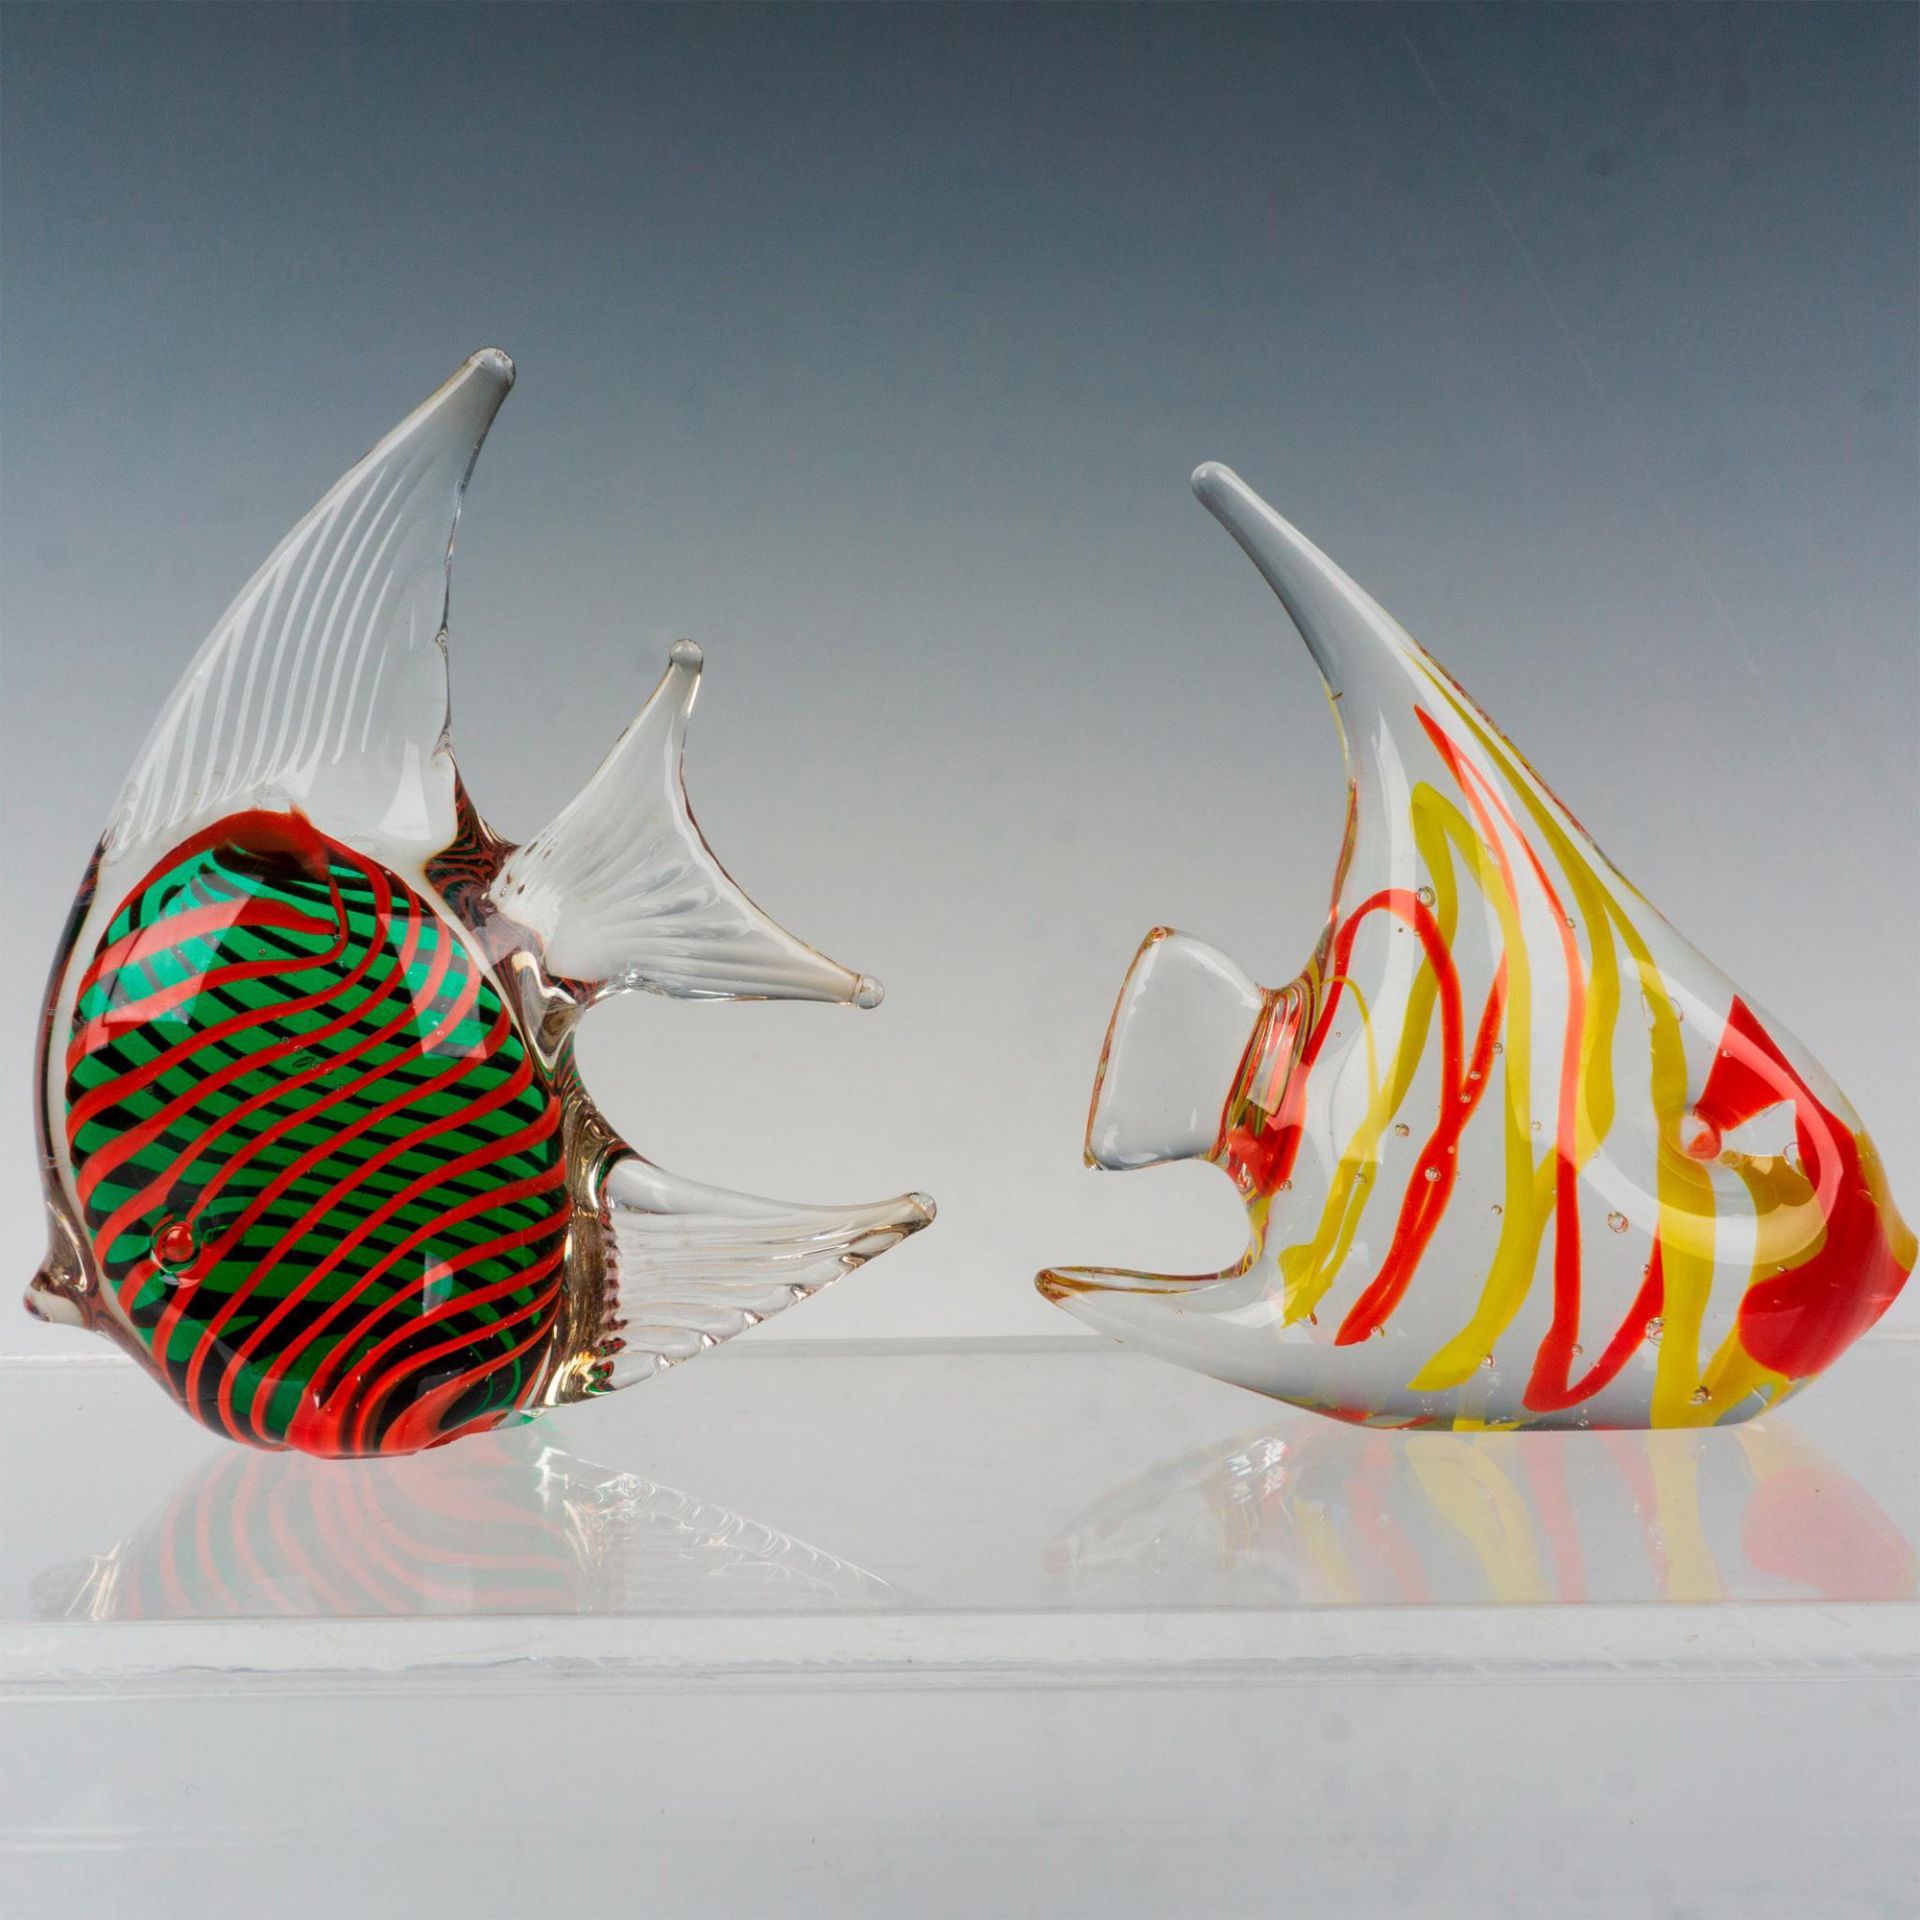 2pc Vintage Murano Art Glass Tropical Fish Paperweight - Image 2 of 3